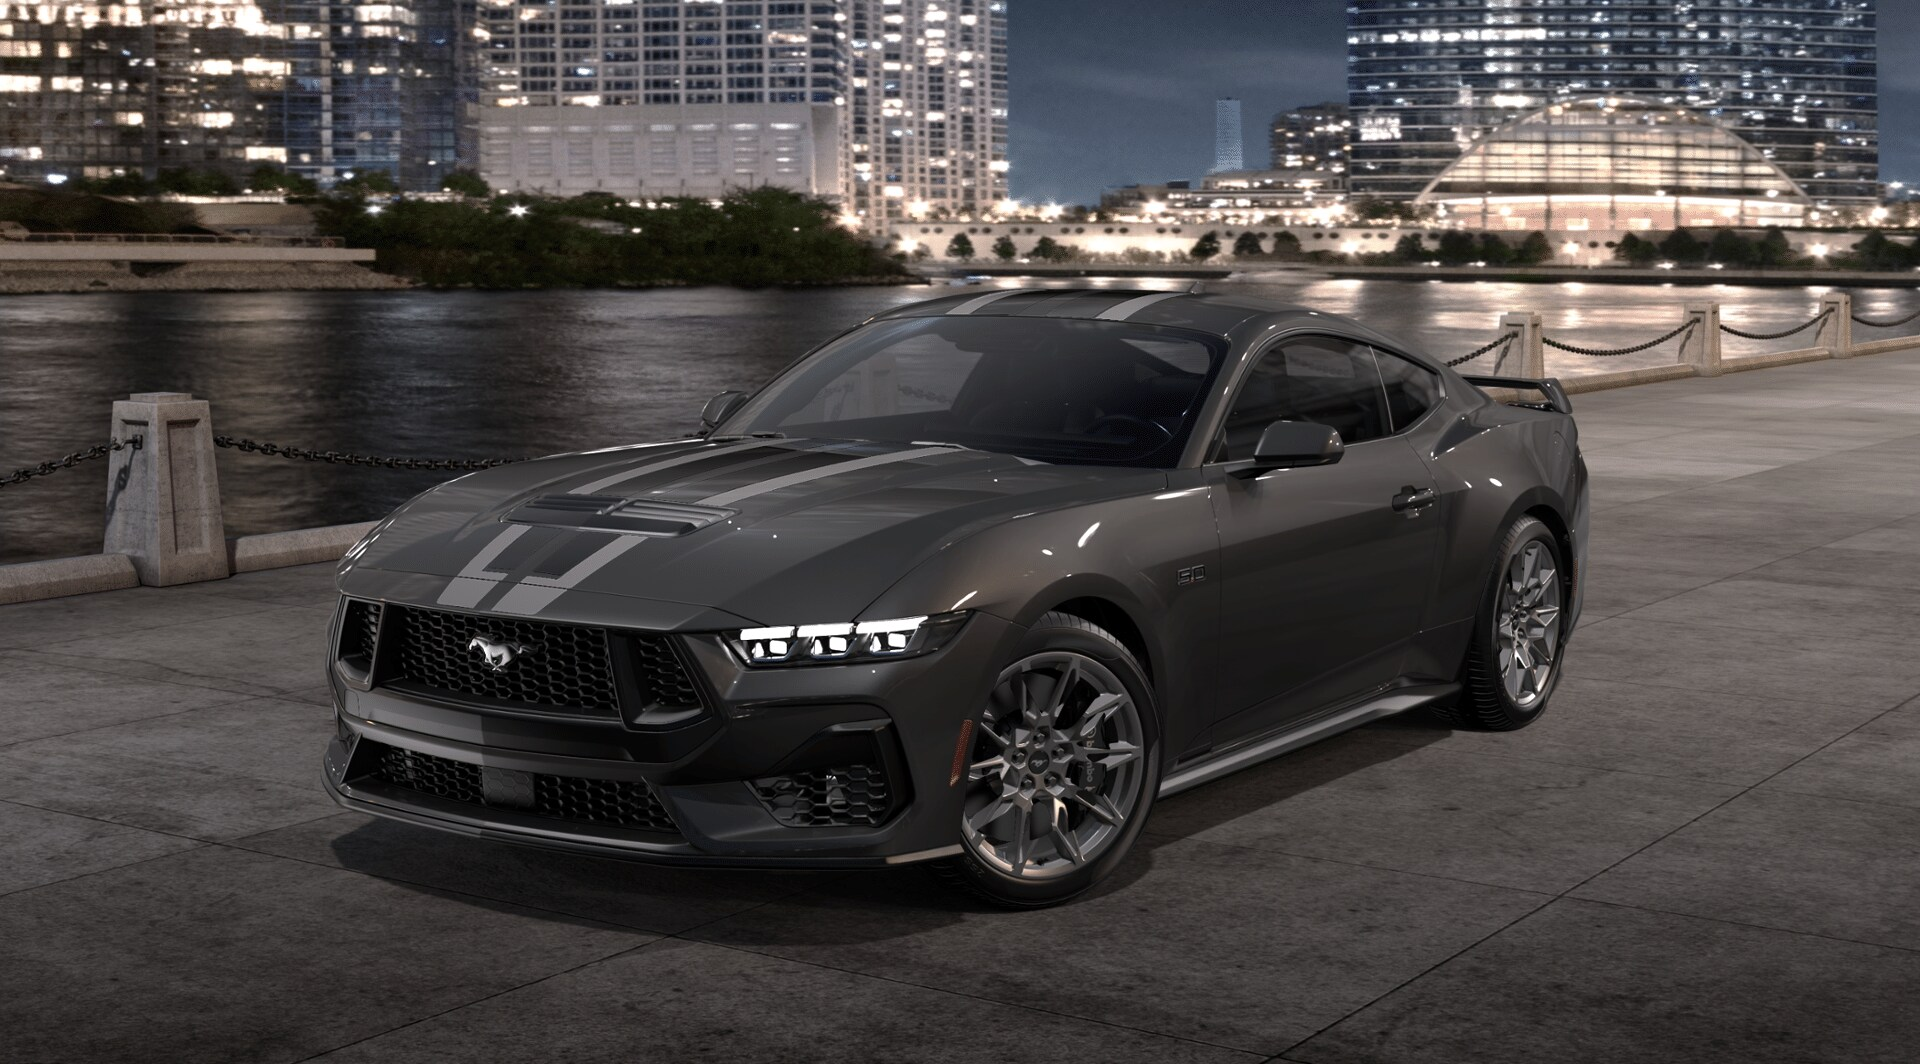 S650 Mustang 2024 Mustang Build & Price Configurator UPDATED!! [New Images] 1688155772335